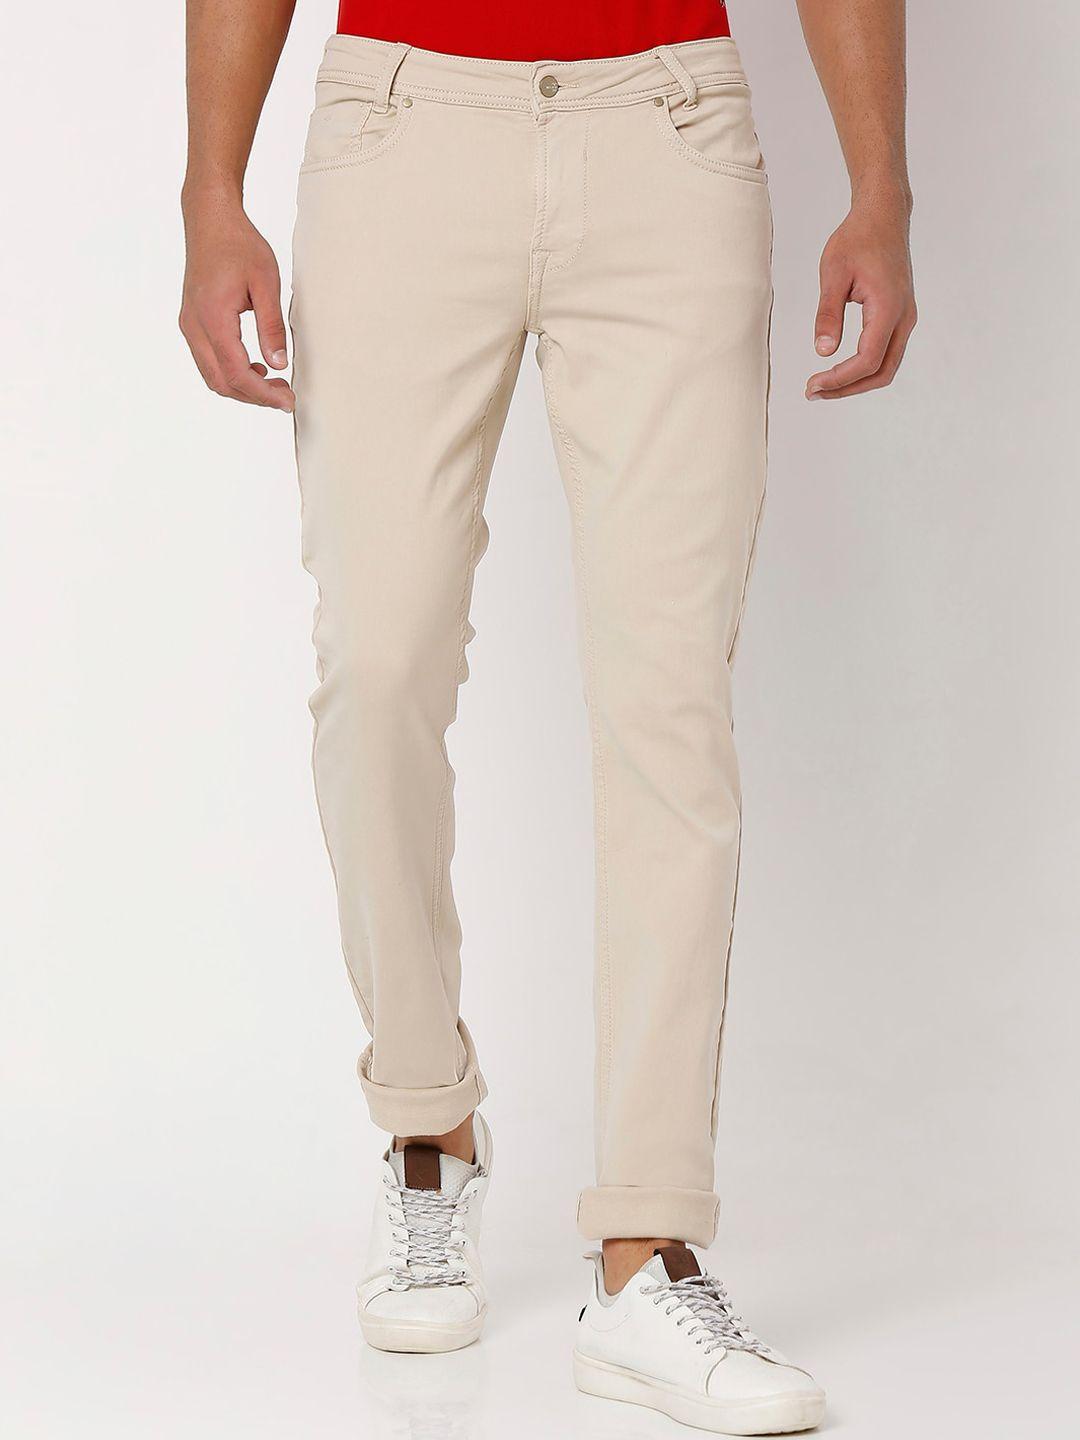 mufti-men-slim-fit-easy-wash-cotton-trousers